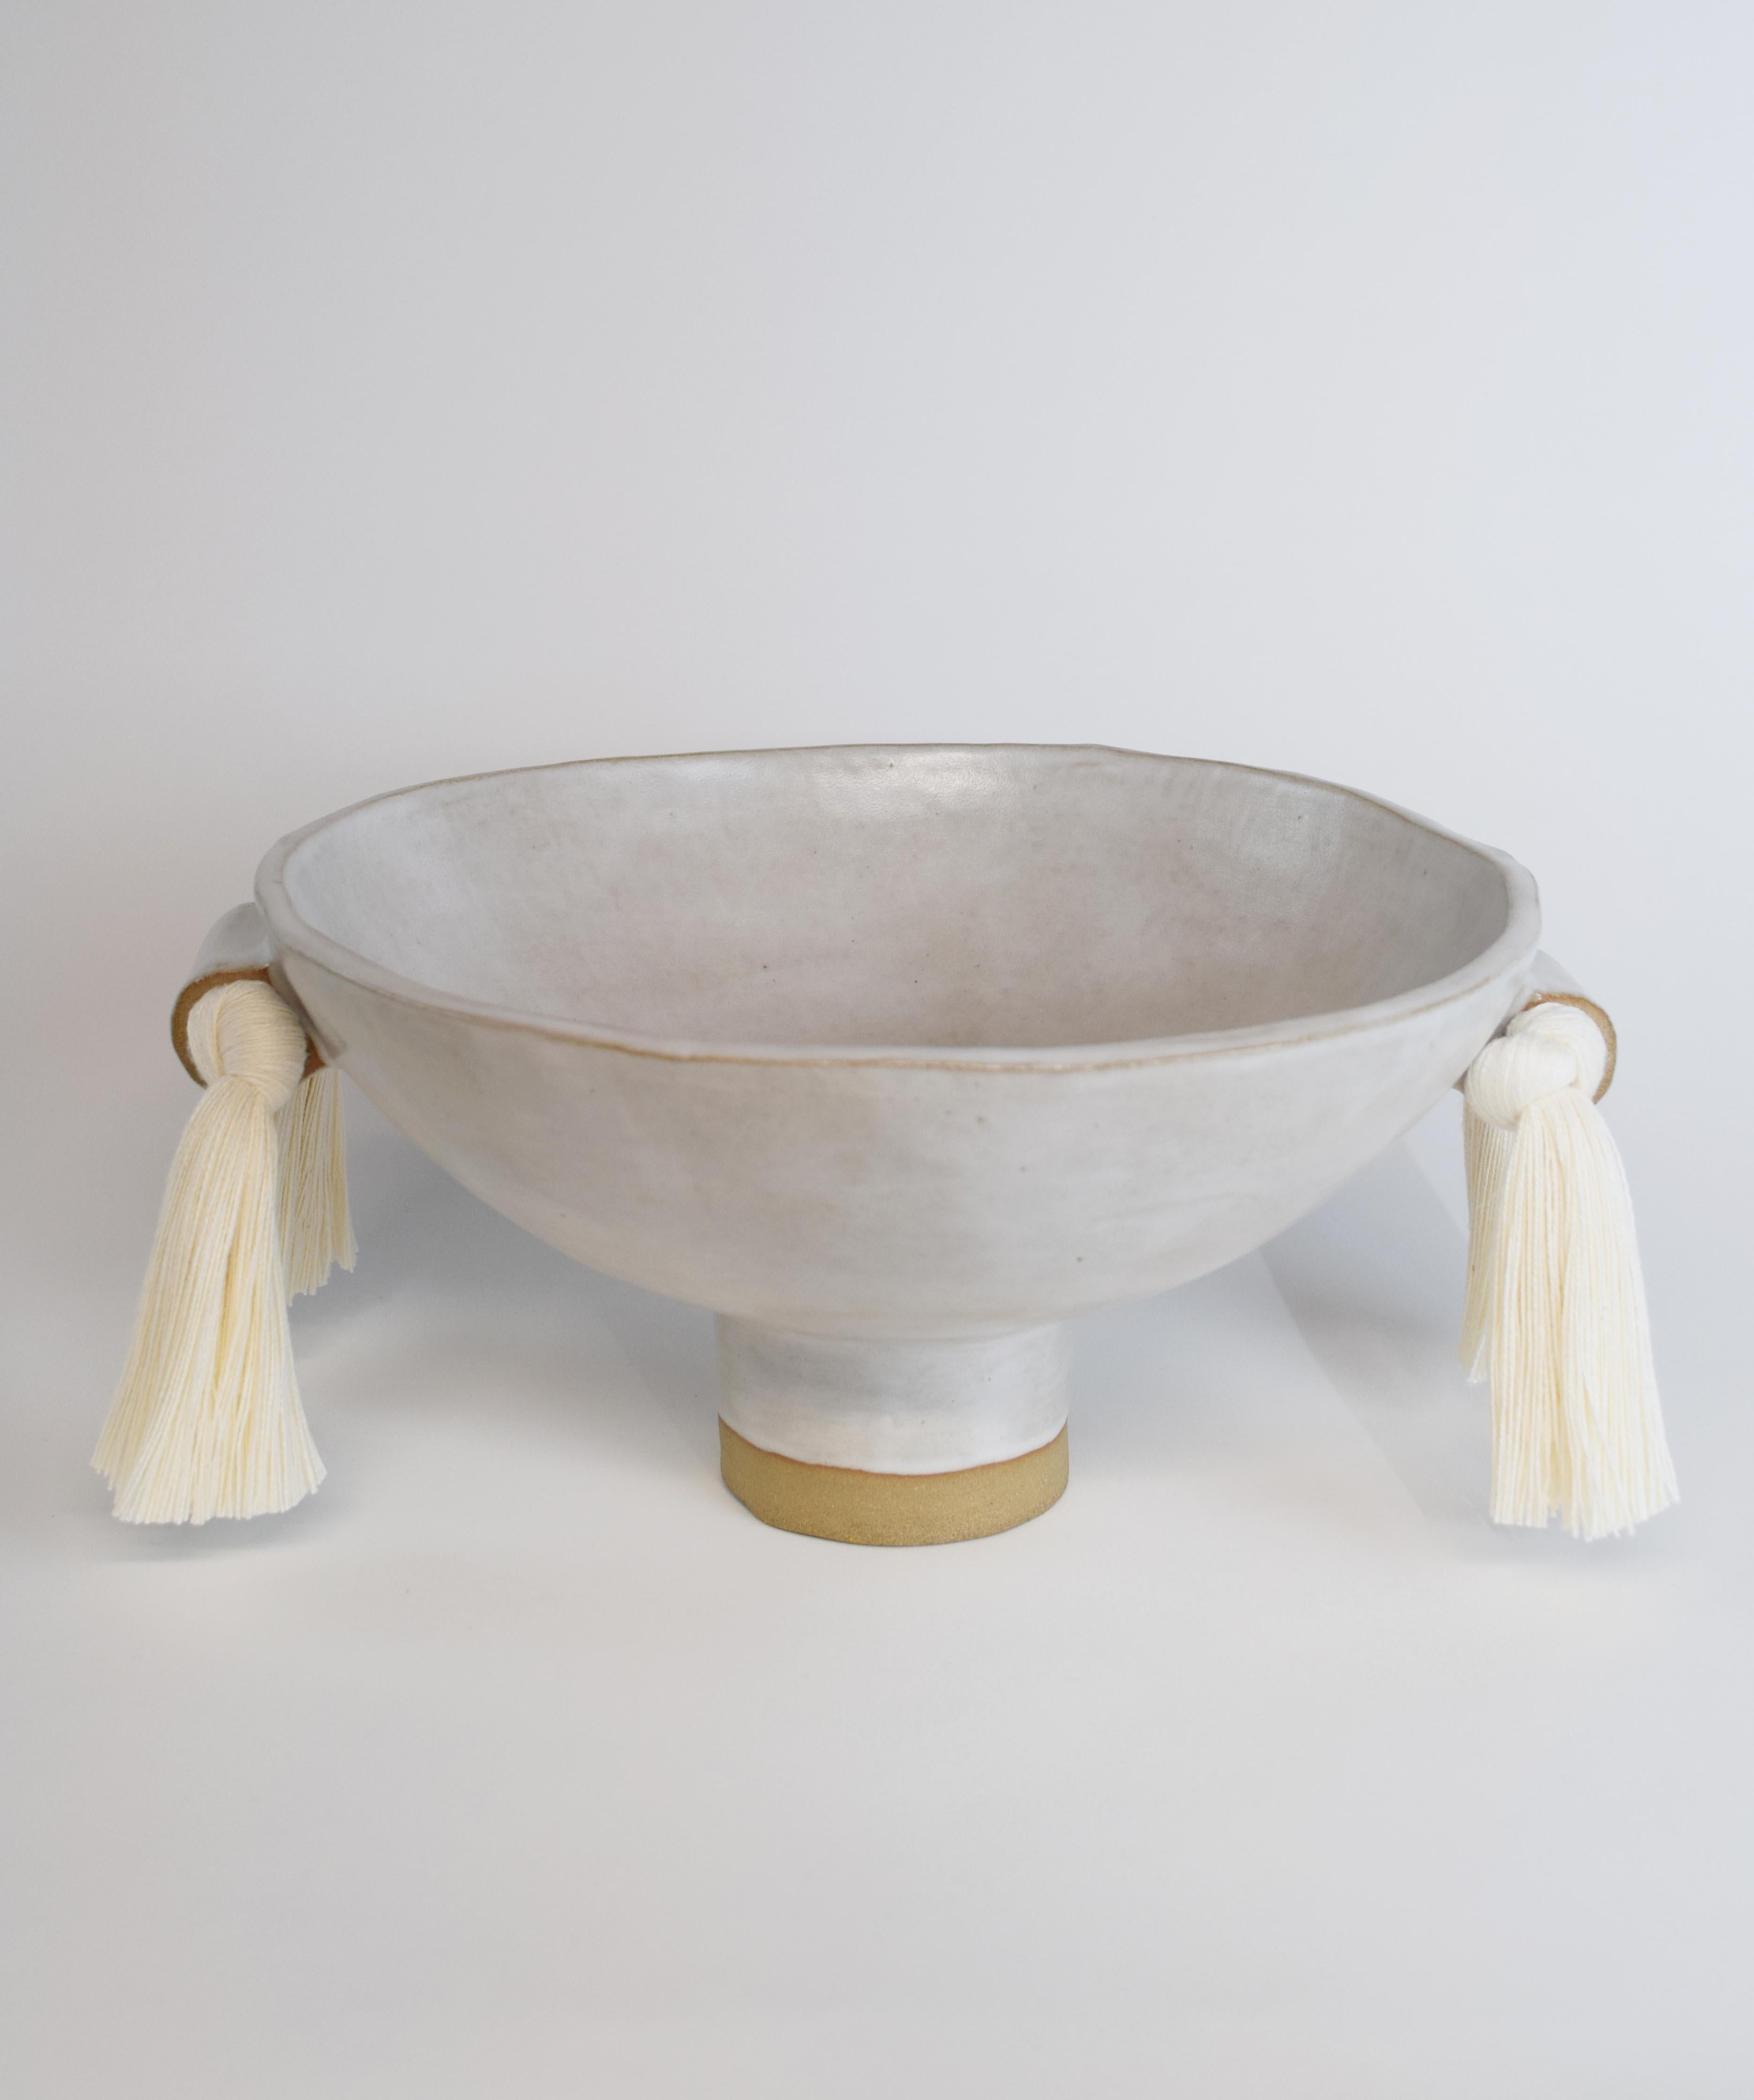 Decorative bowl #697 by Karen Gayle Tinney

A decorative bowl designed to compliment Vase #531, with similar sculptural details and ample surface area to make it function nicely as a fruit bowl or catch-all dish.

Handmade stoneware with white